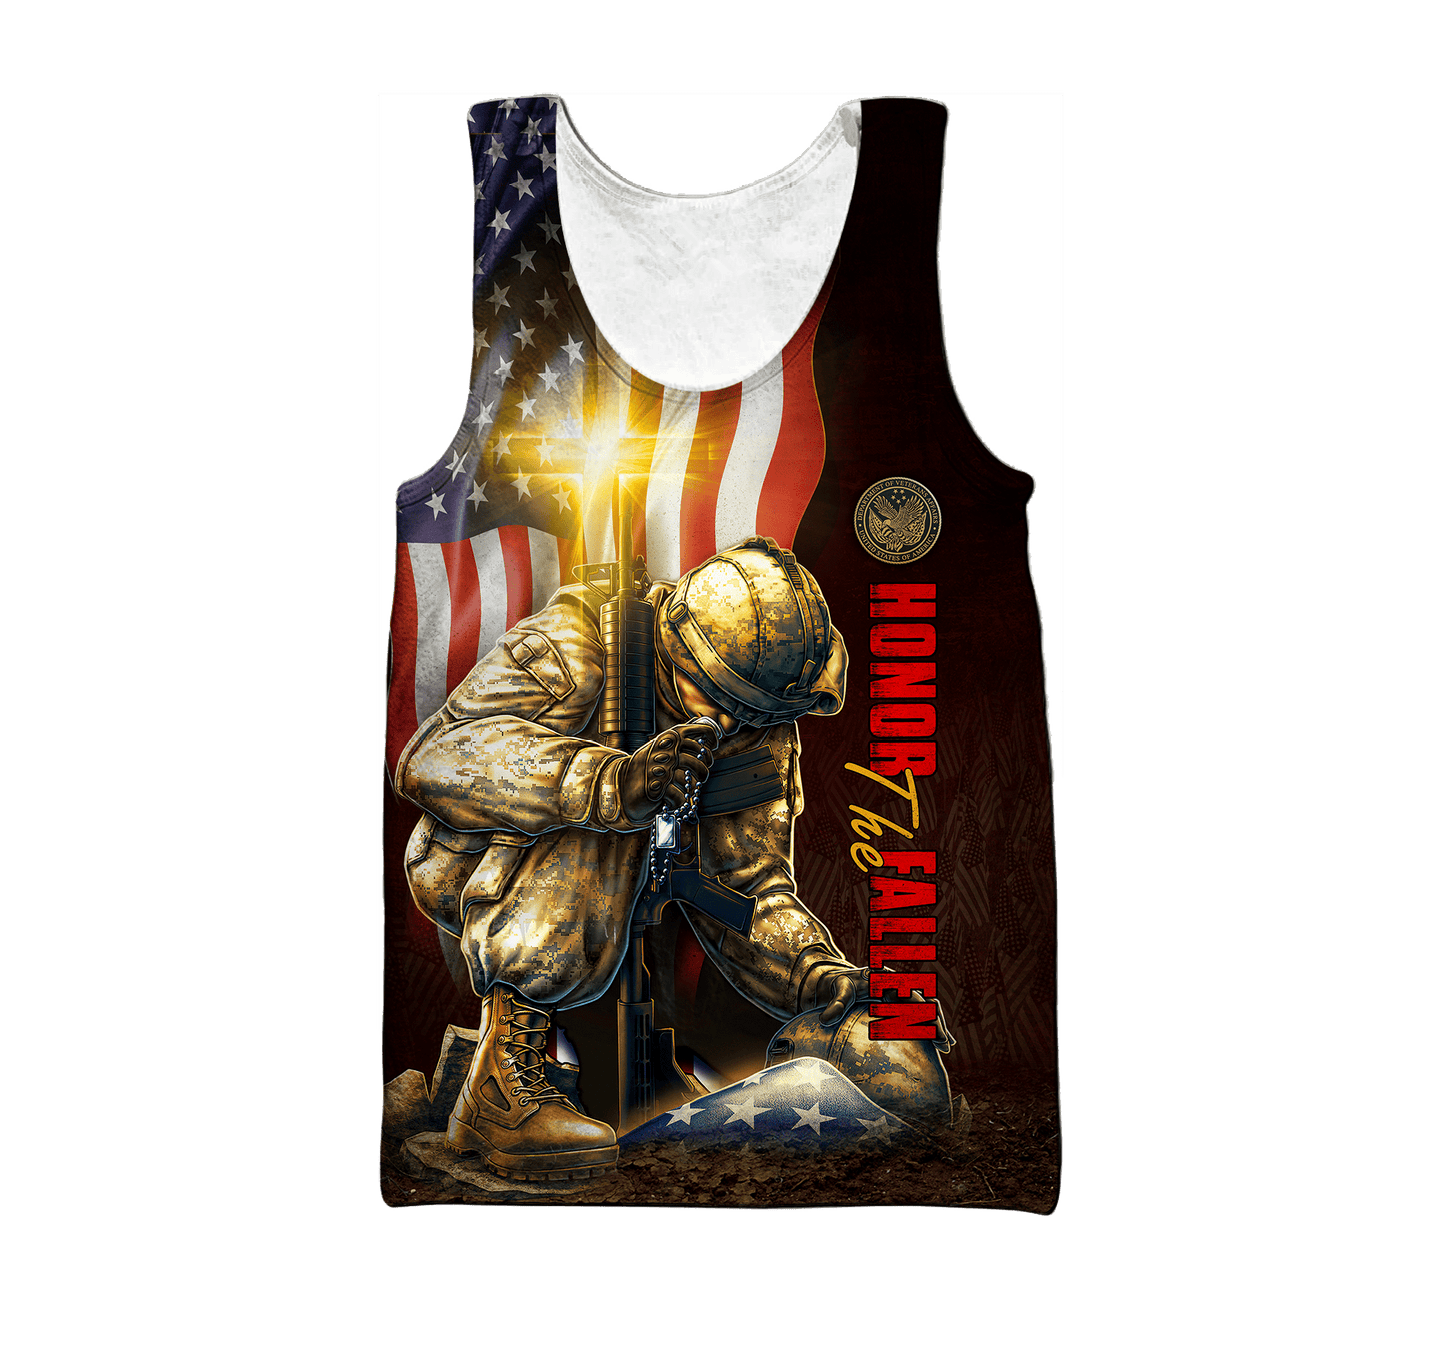 US Veteran - Eagle With American Flag Unisex Shirts